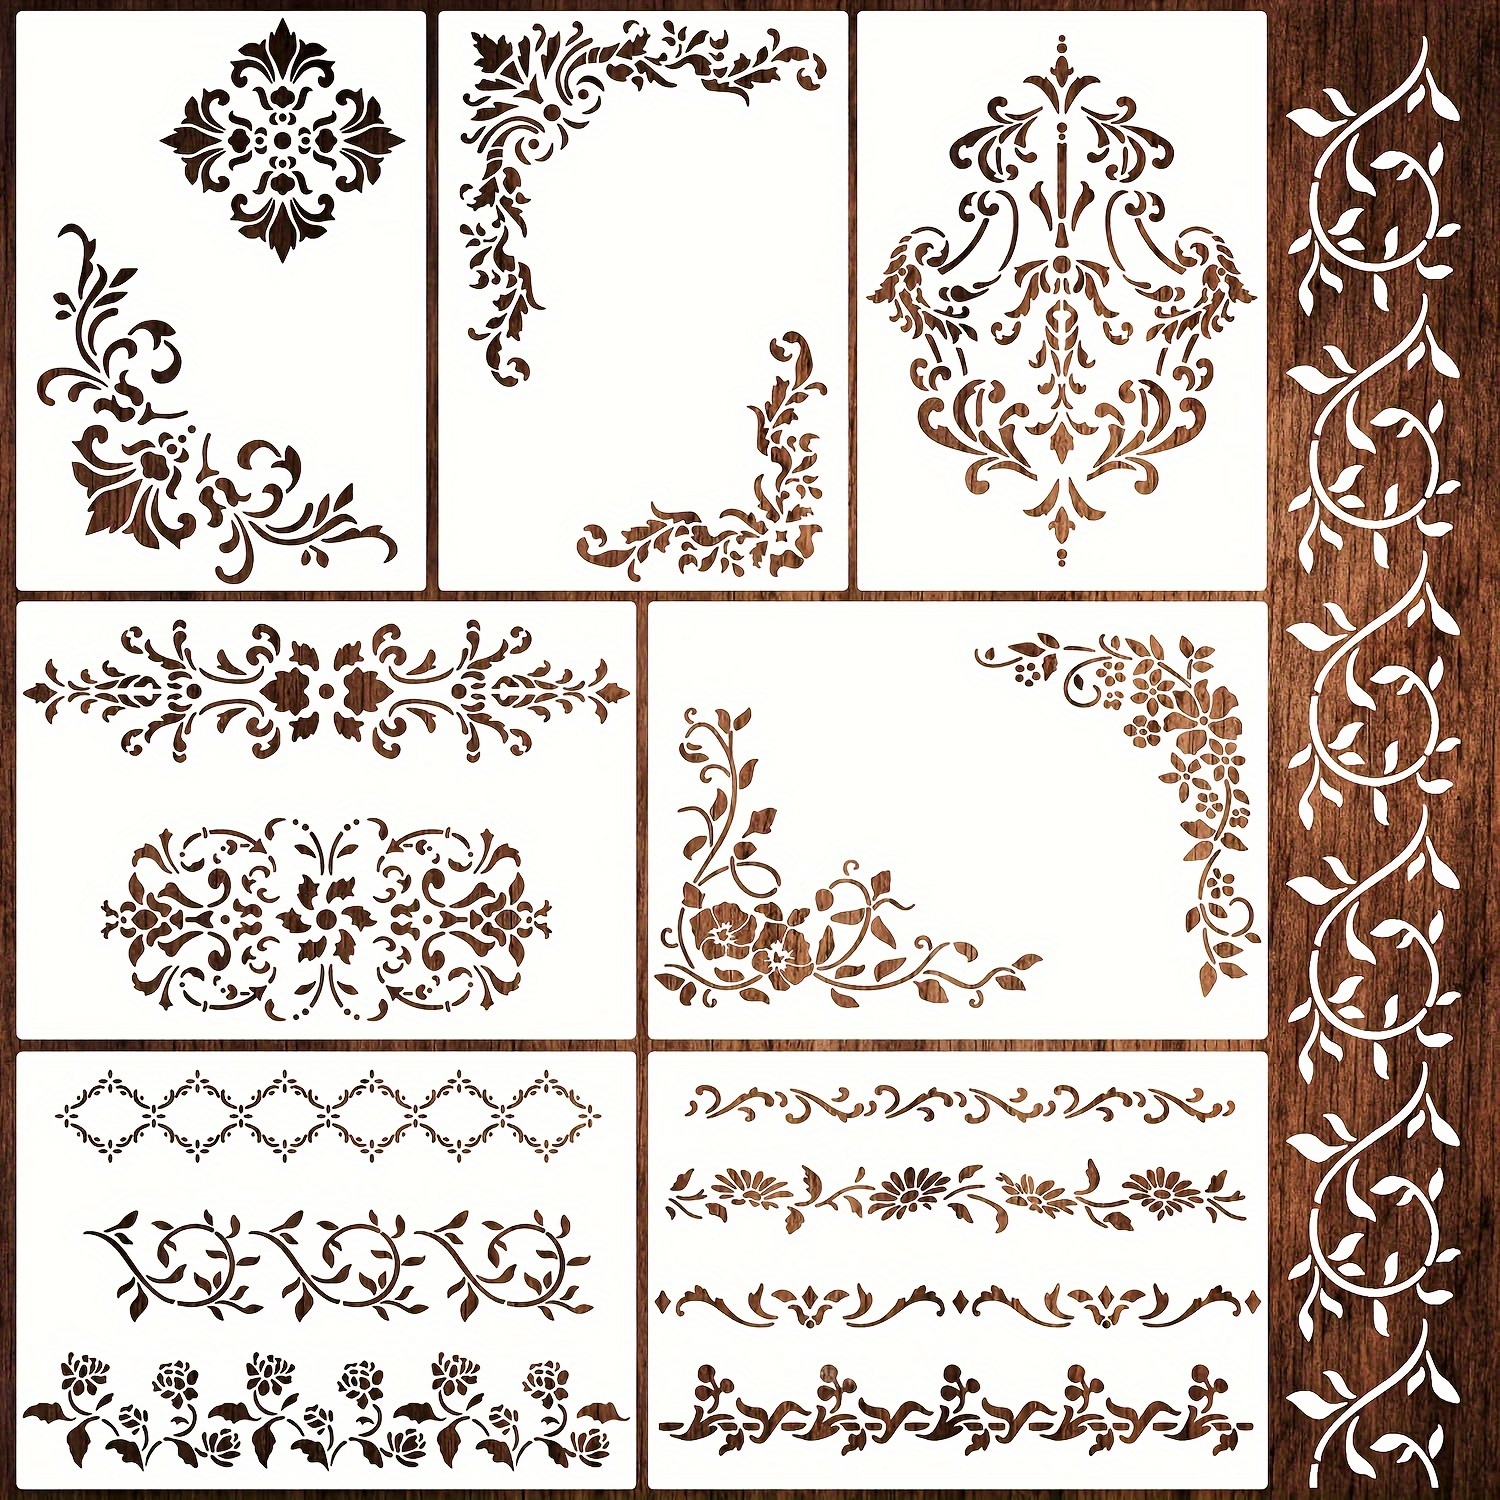 

7pcs Reusable Corner Stencils - Plastic Damask Border & Wildflower Templates For Wood, Walls, Fabric, Floor - Vintage Diy Craft Painting Tools For Home Décor And Art